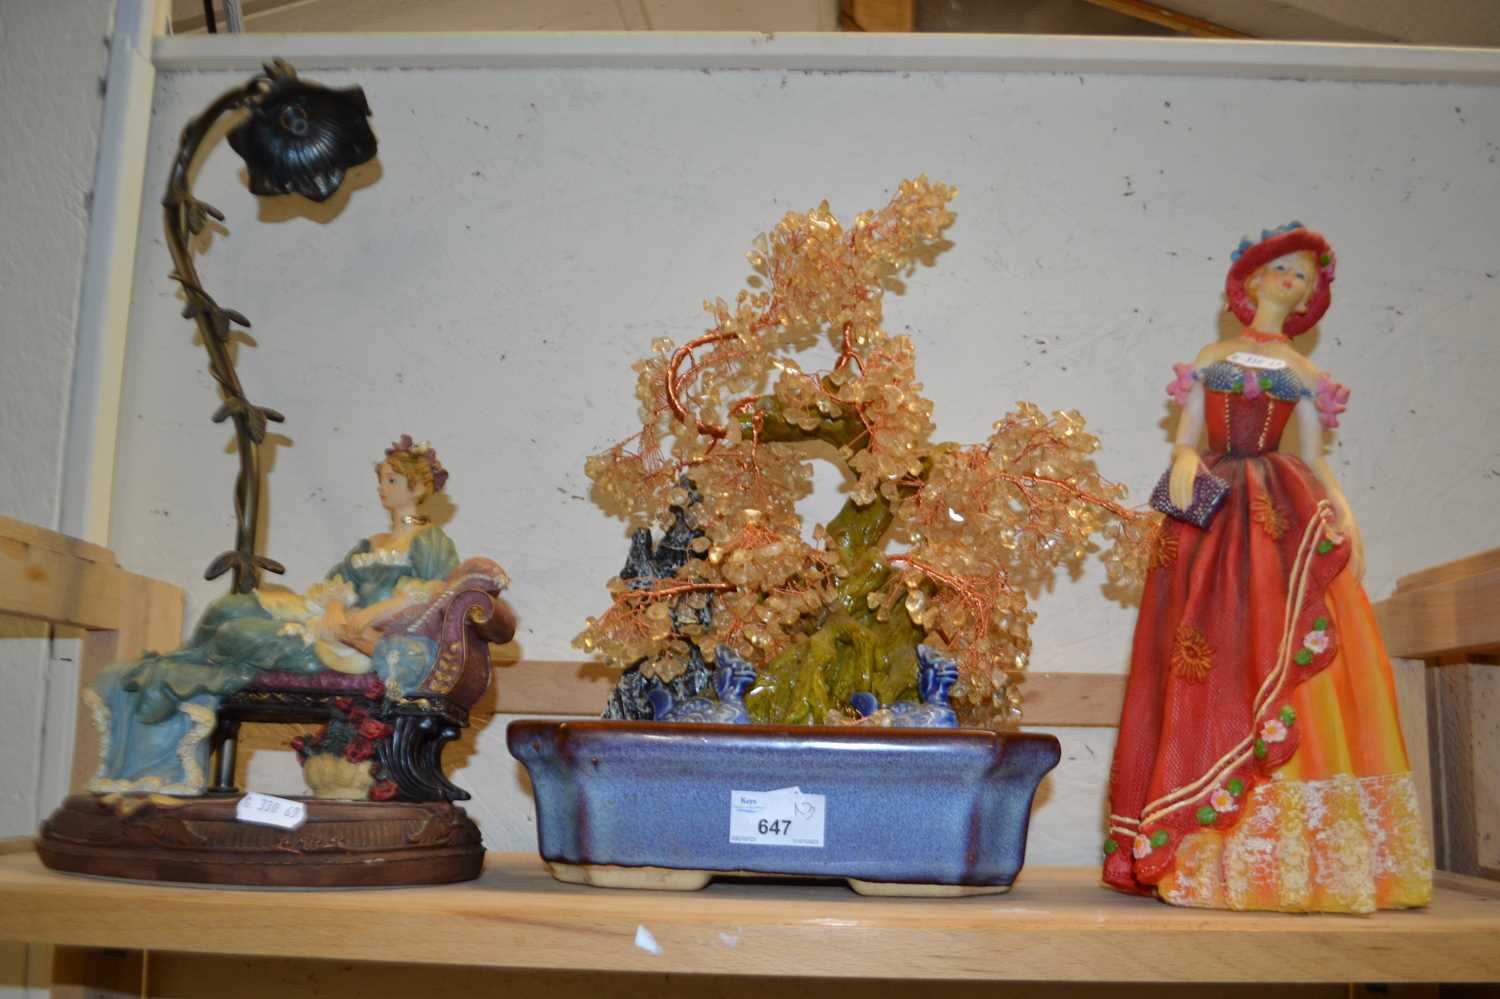 Gemstone and copper bonsai style tree together with a resin figural lamp and a figure of a lady (3)